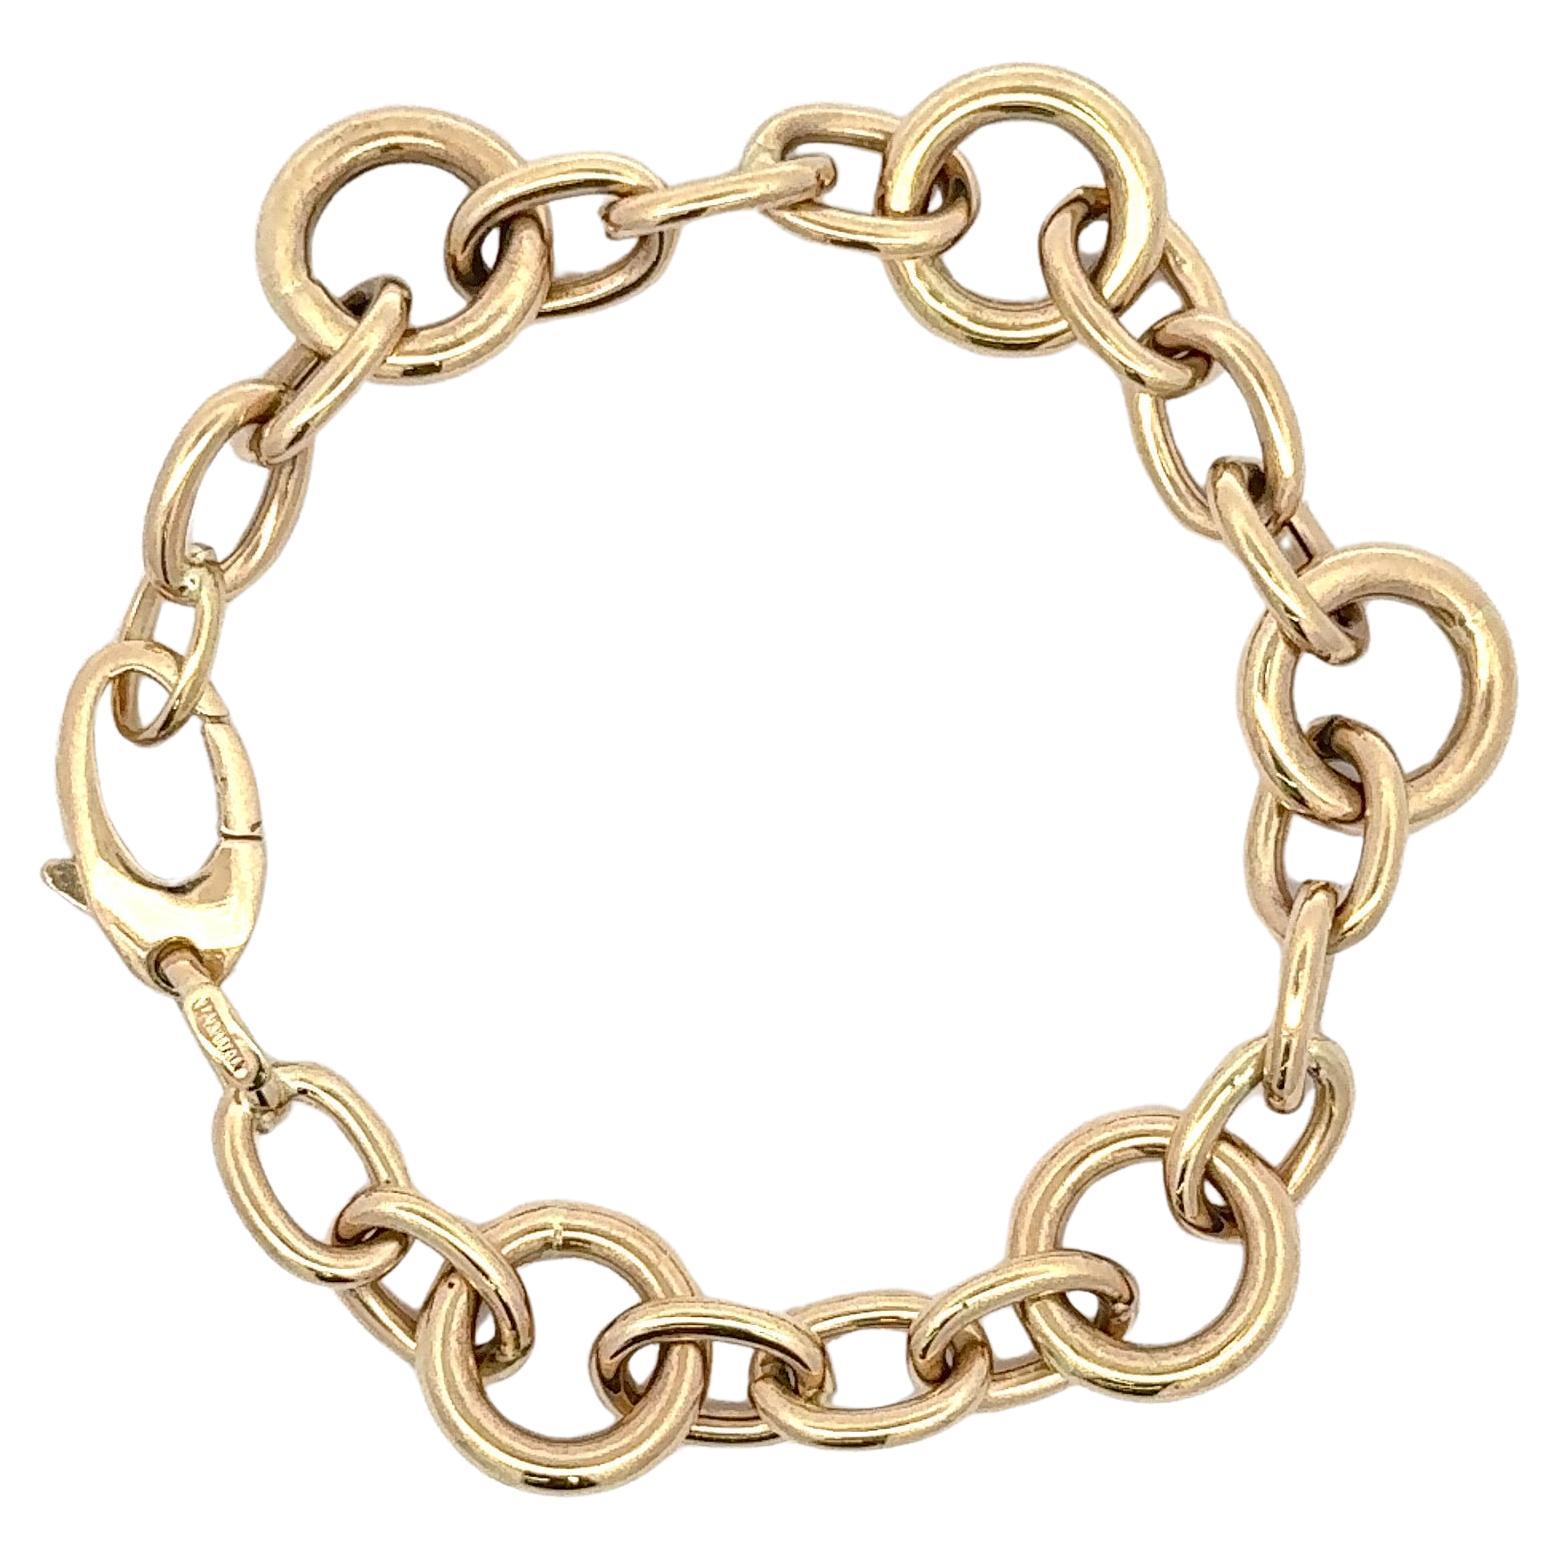 Italian 14 karat yellow gold bracelet featuring sections of three oval links and one large round link weighing 9.6 grams. 
Round link: 13.4 mm
Oval: 11 mm x 8 mm